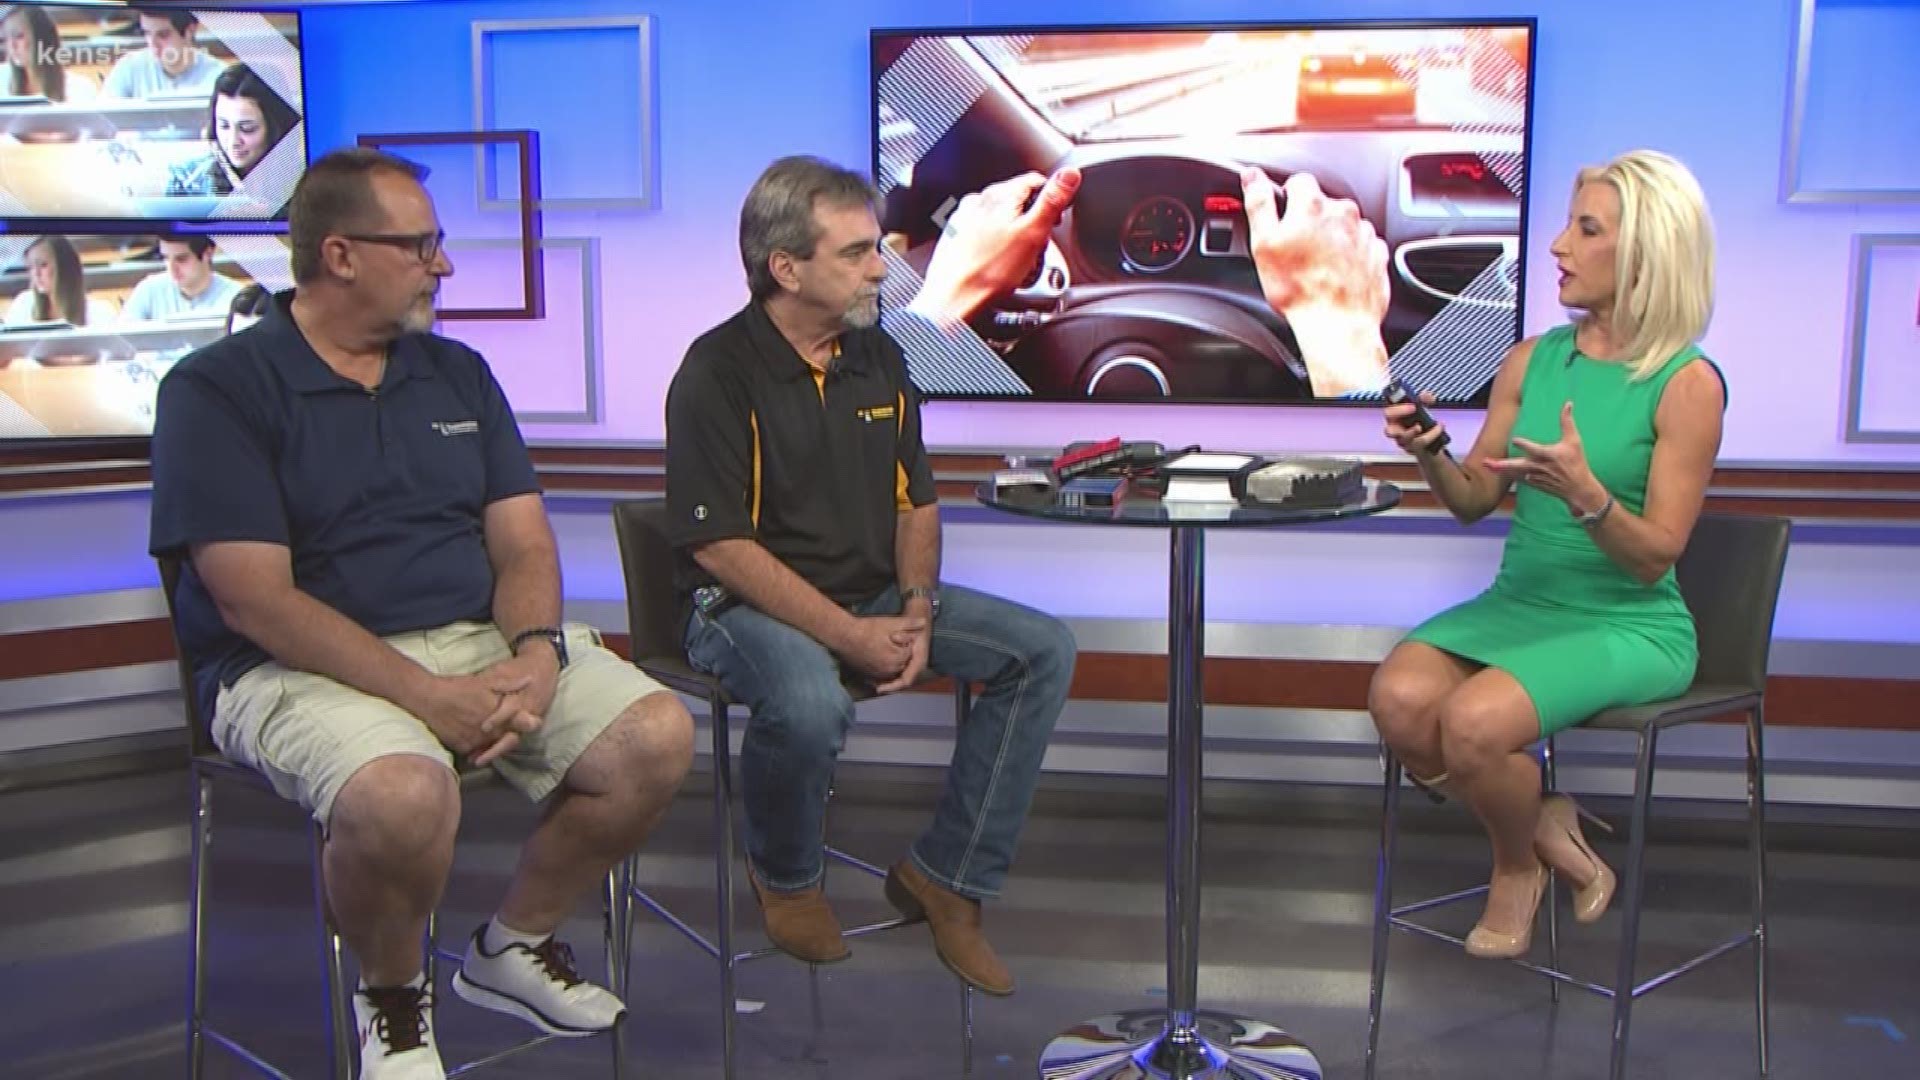 Many SA families are sending their students off to college. For these young drivers, car care may not be at the top of their minds. Danny O'Rourke and Rob Cassidy from Mr. Transmission of San Antonio share some handy tips on simple car maintenance.